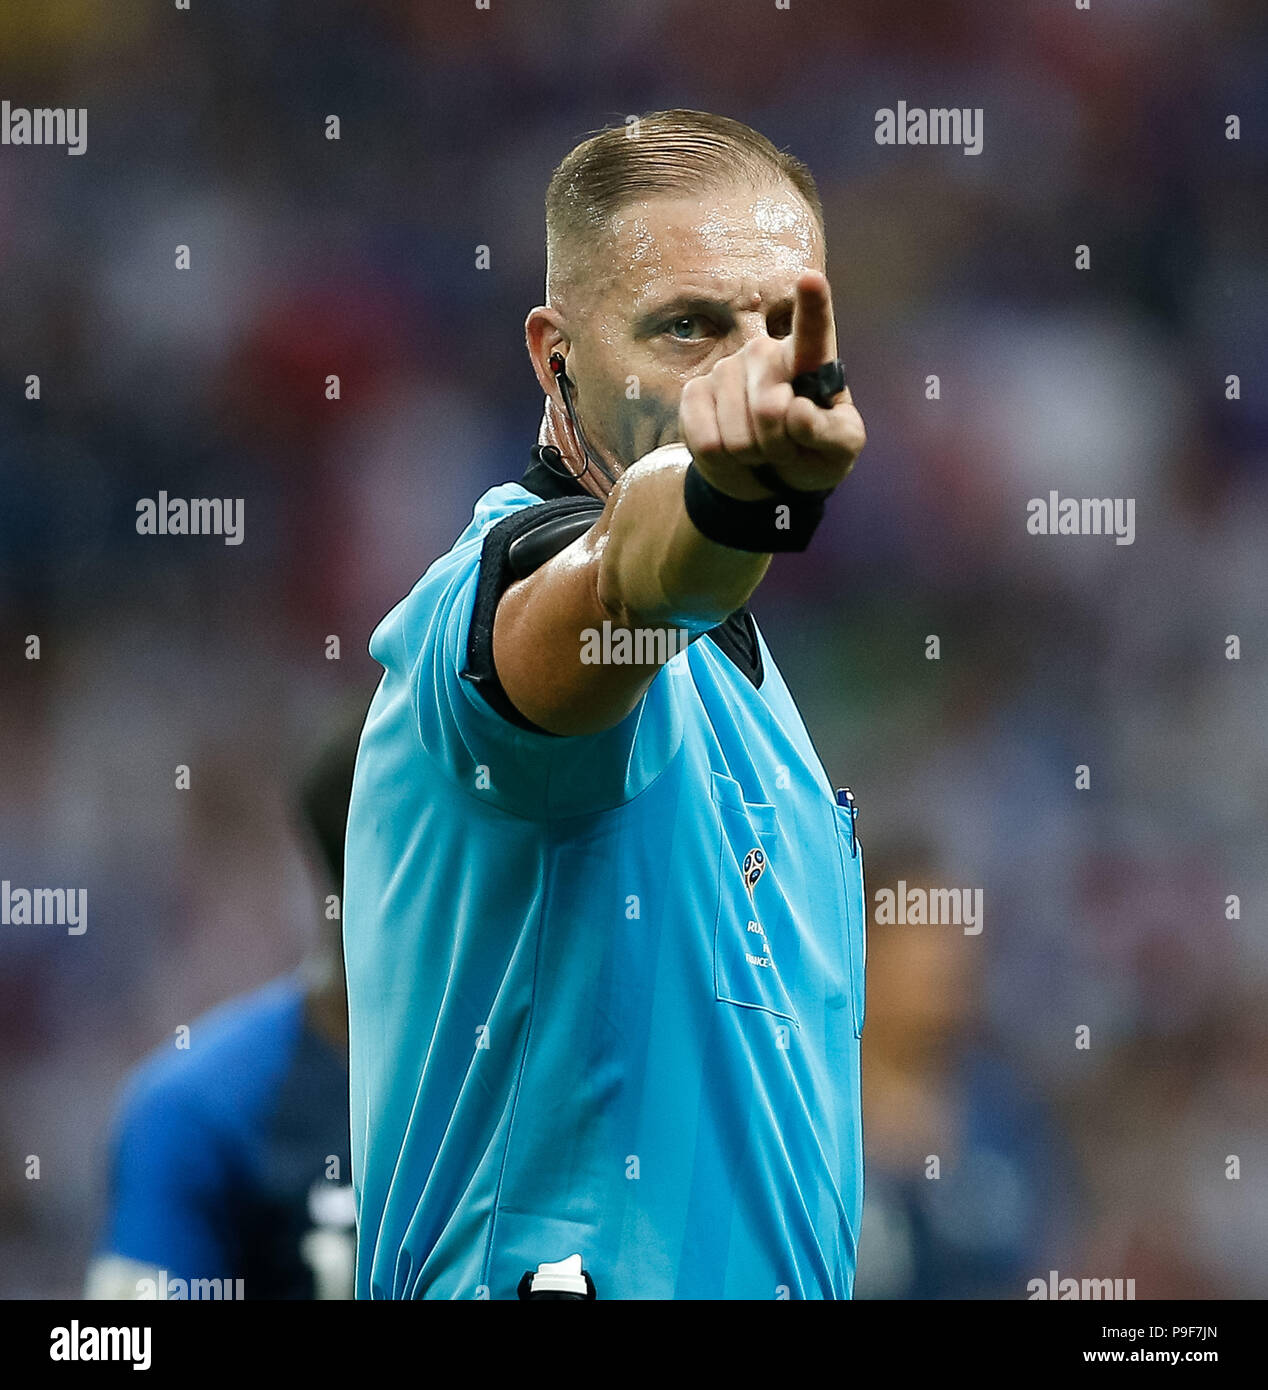 MOSCOU, MO - 15.07.2018: FRANCE VS CROATIA - The referee Nesto Pitana during match between France and Croatia valid for the final of the 2018 World Cup held at the Luzhniki Stadium in Moscow, Russia. (Photo: Marcelo Machado de Melo/Fotoarena) Stock Photo